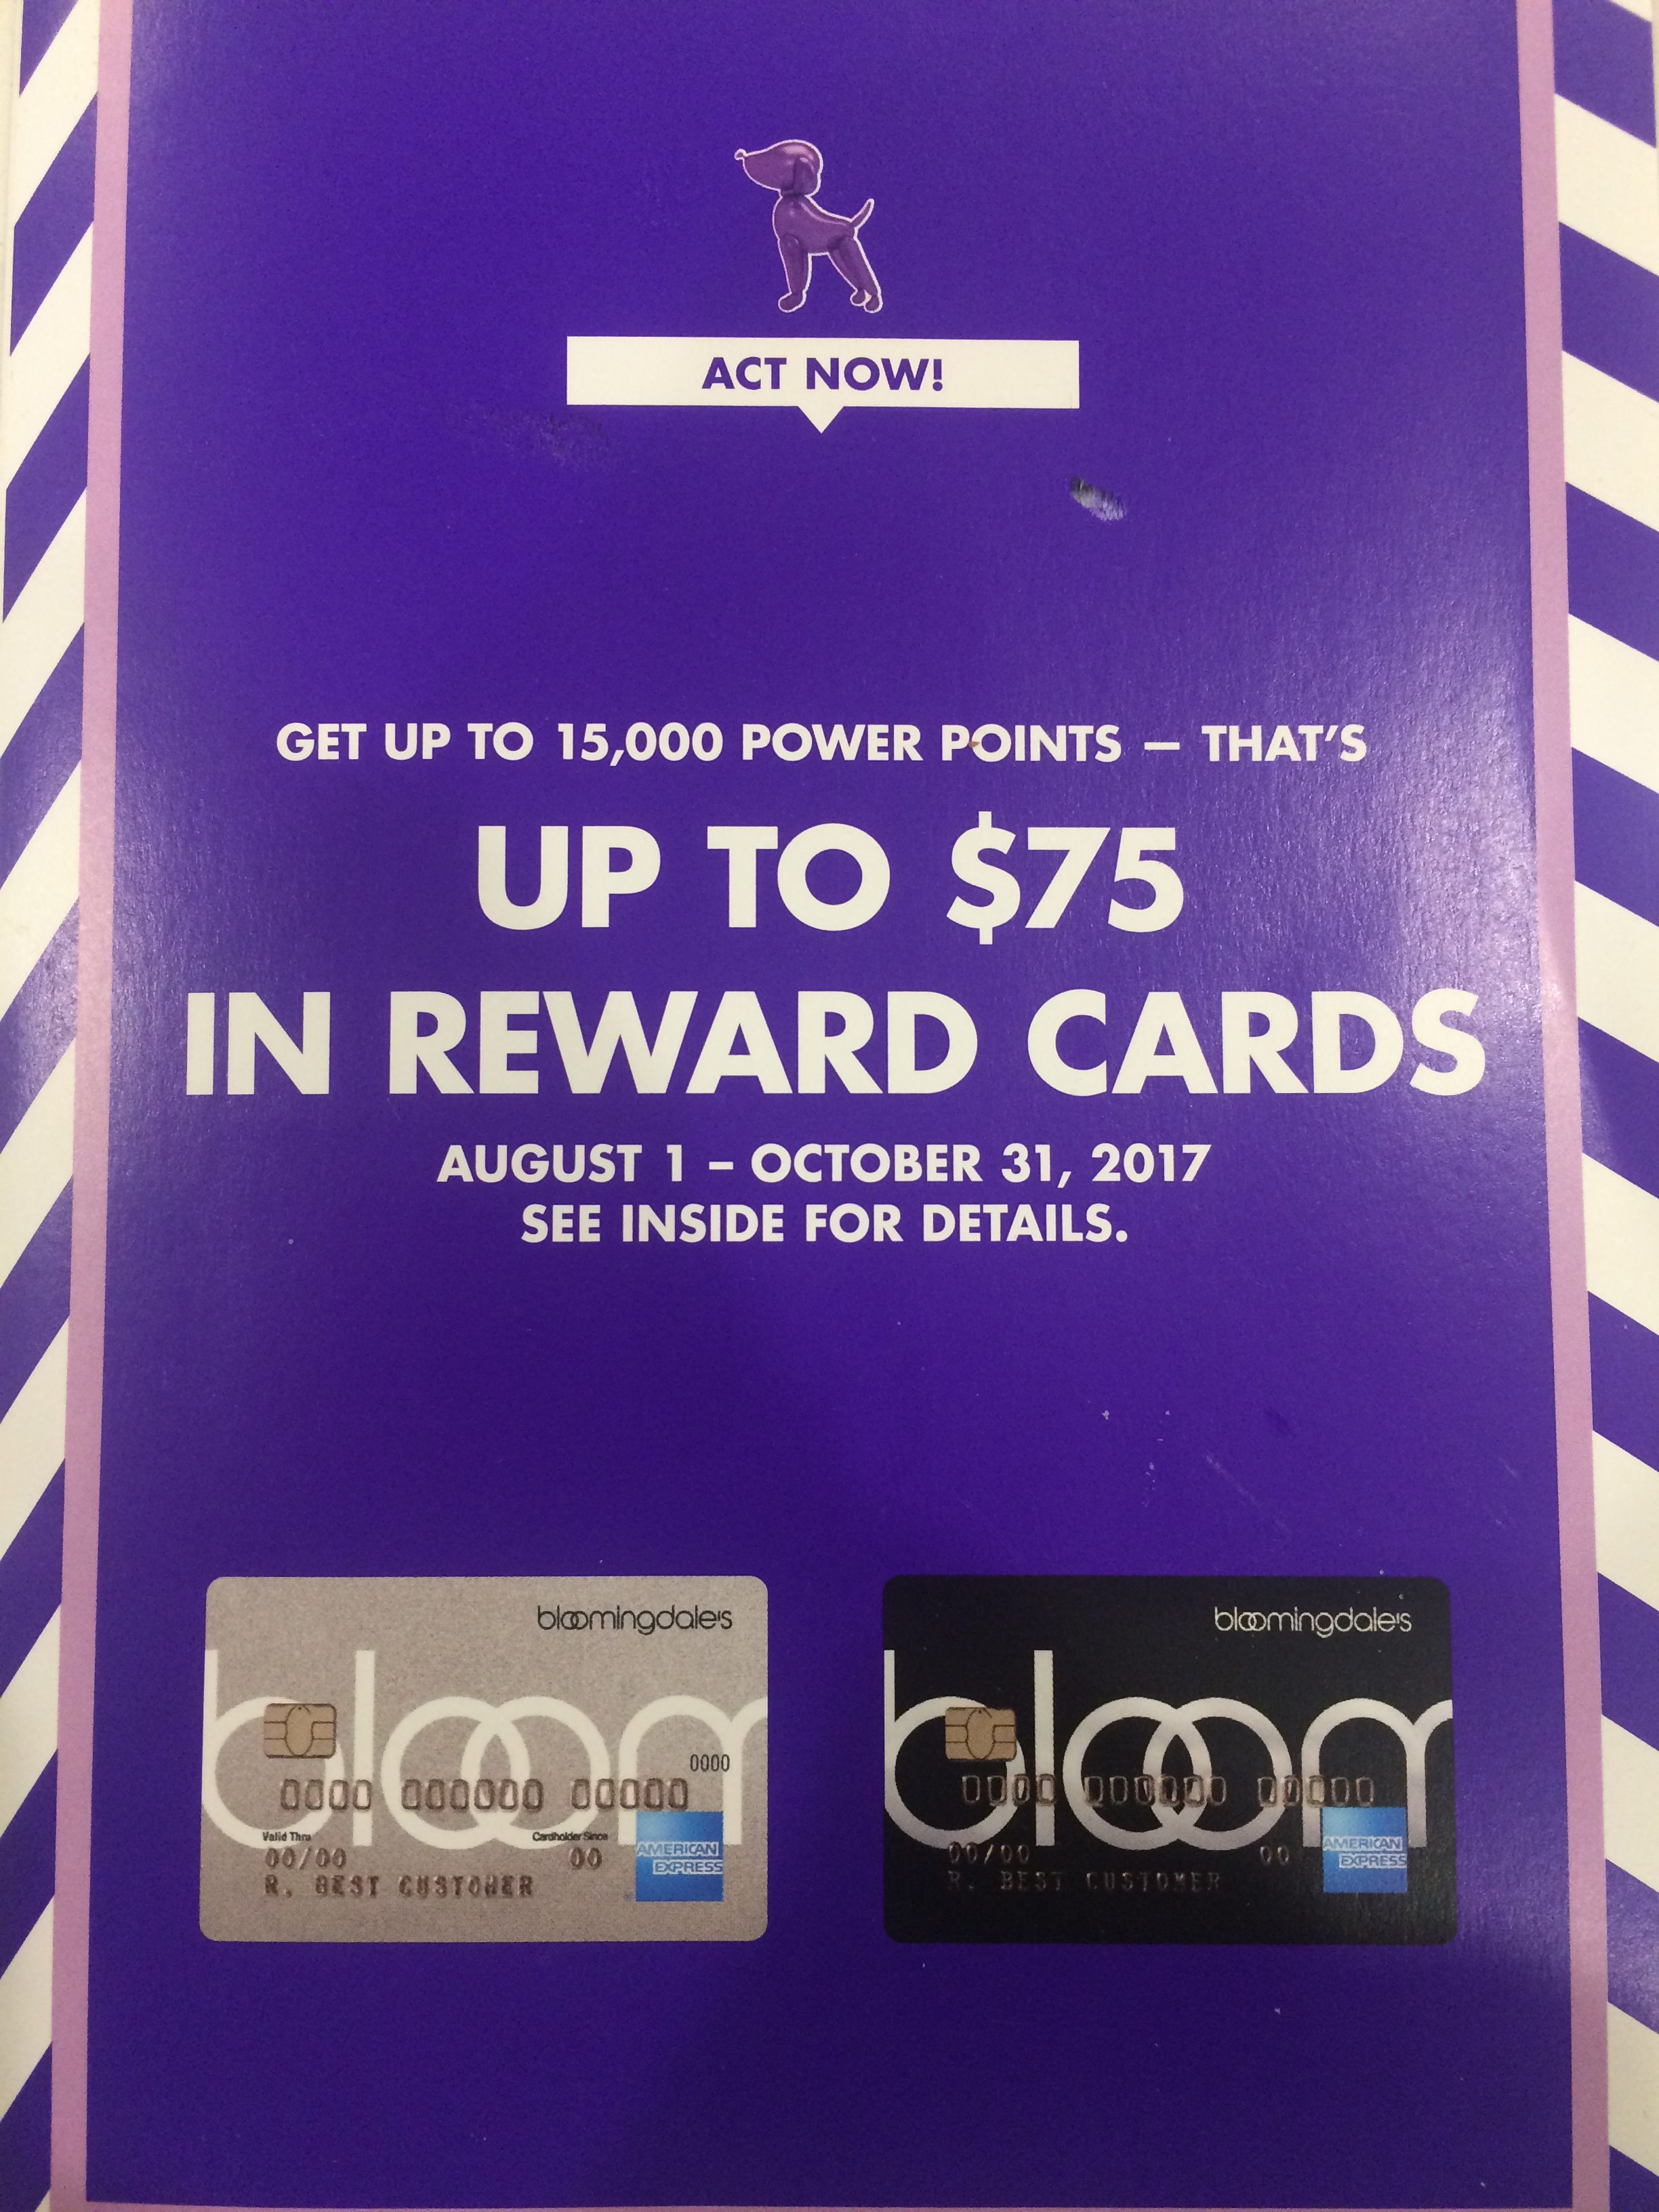 For The Months Of August September And October If You Make 10 Purchases At Any Merchant On Your Bloomingdales Credit Card 25 Or More